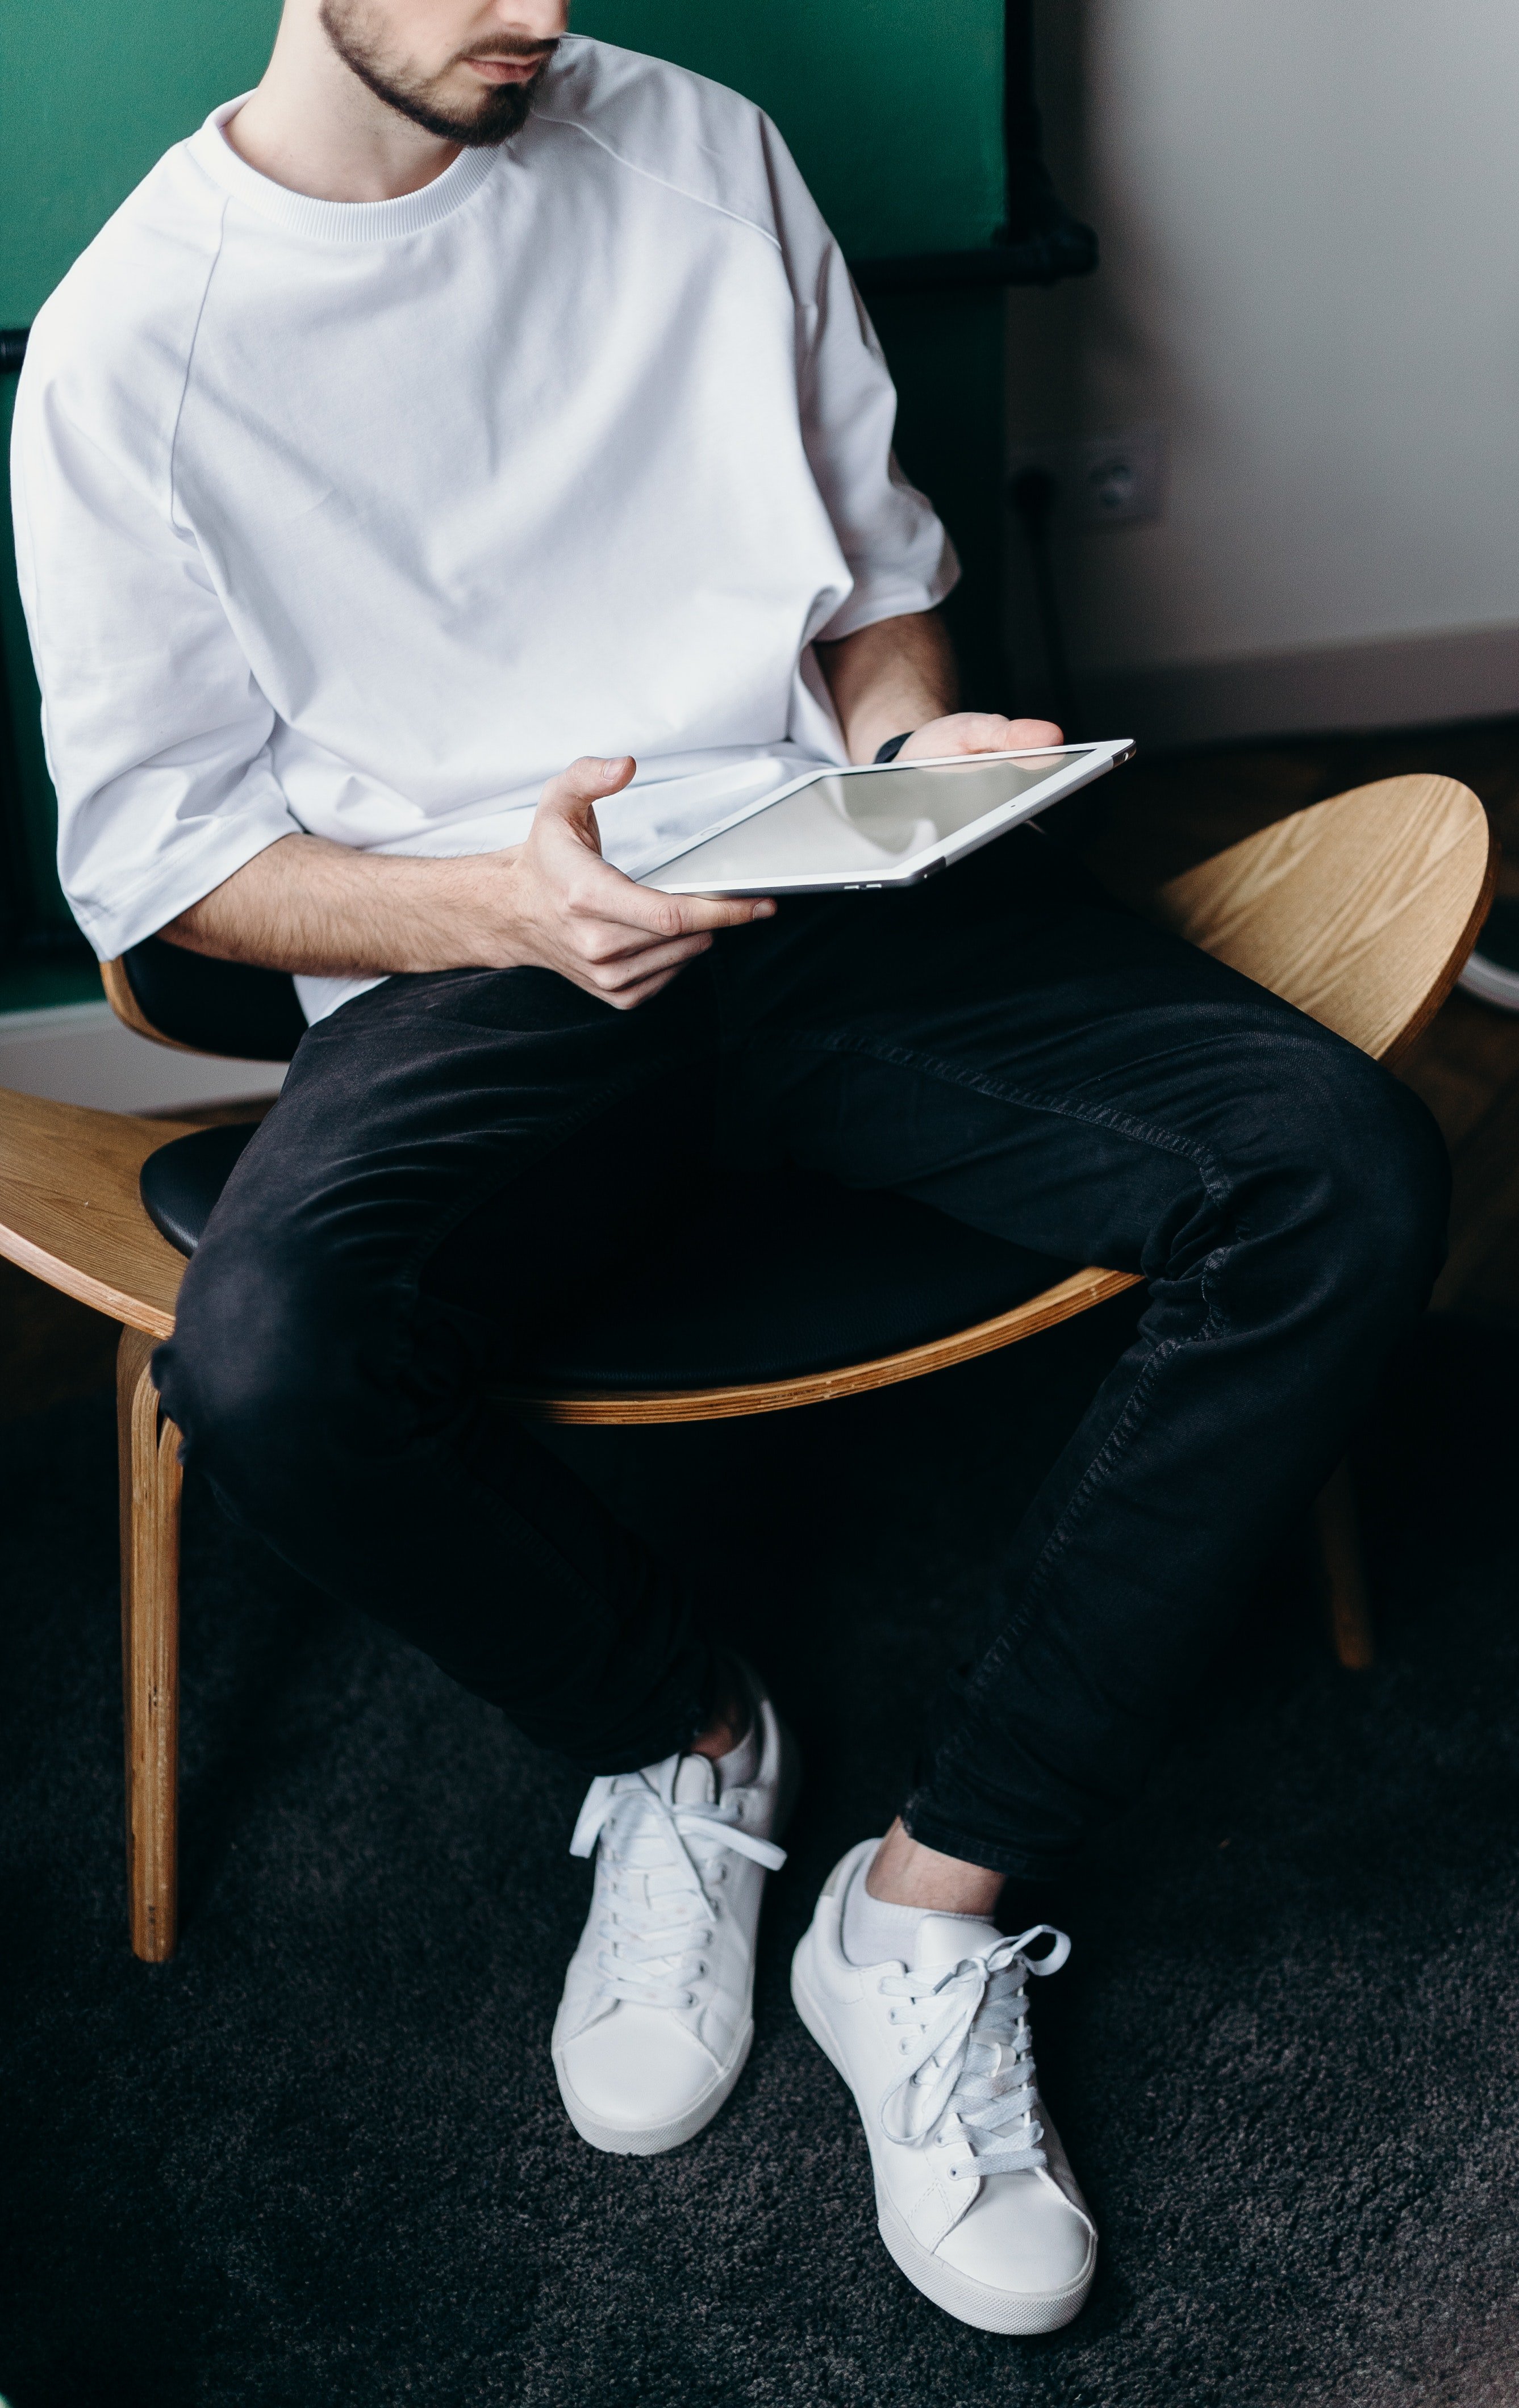 Ashley couldn't stop thinking about those white sneakers of his | Source: Pexels